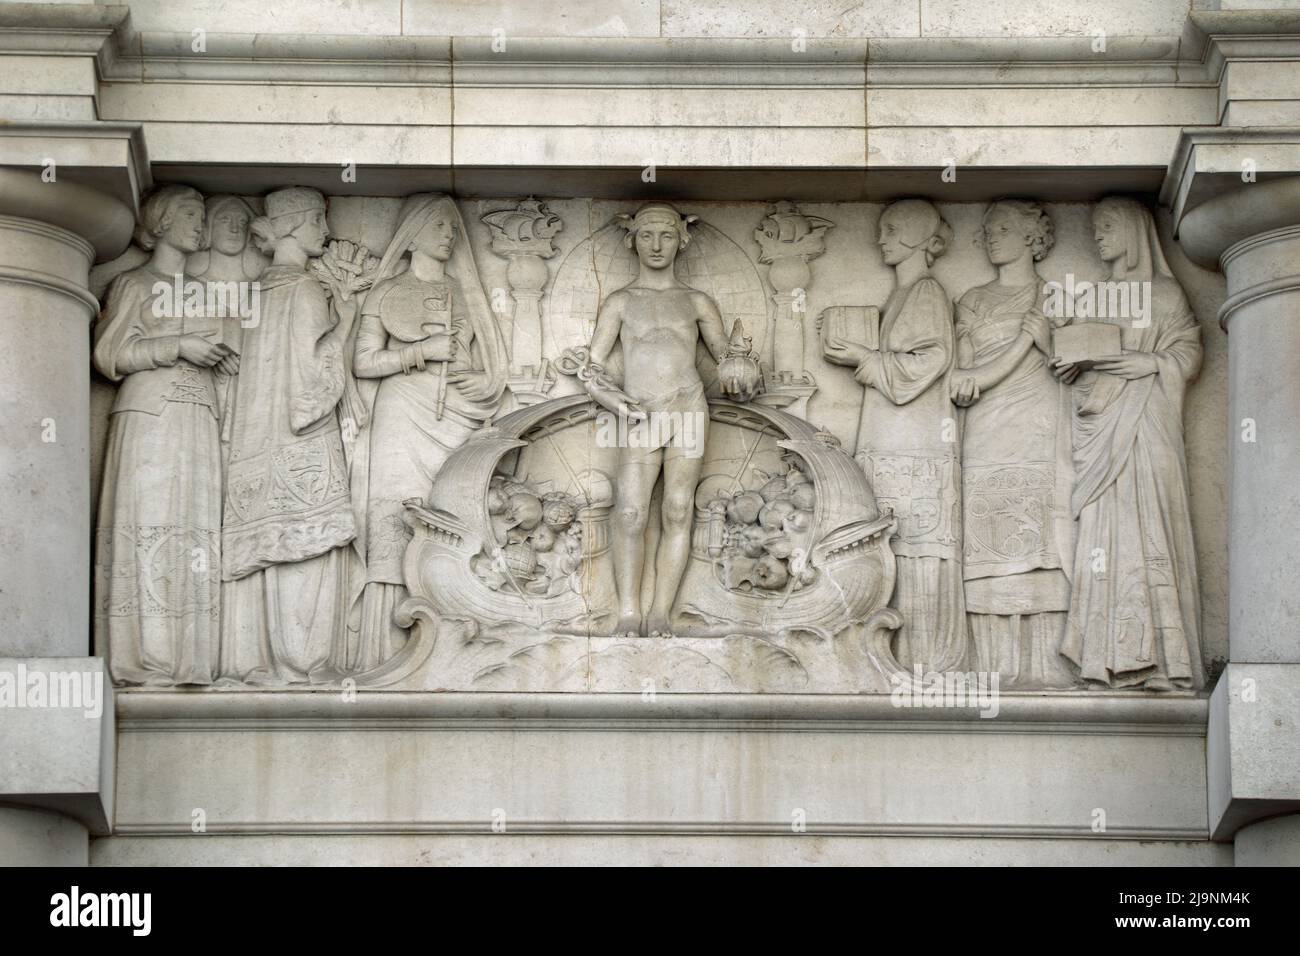 Architectural detail of Lloyds Register of Shipping building in the City of London Stock Photo